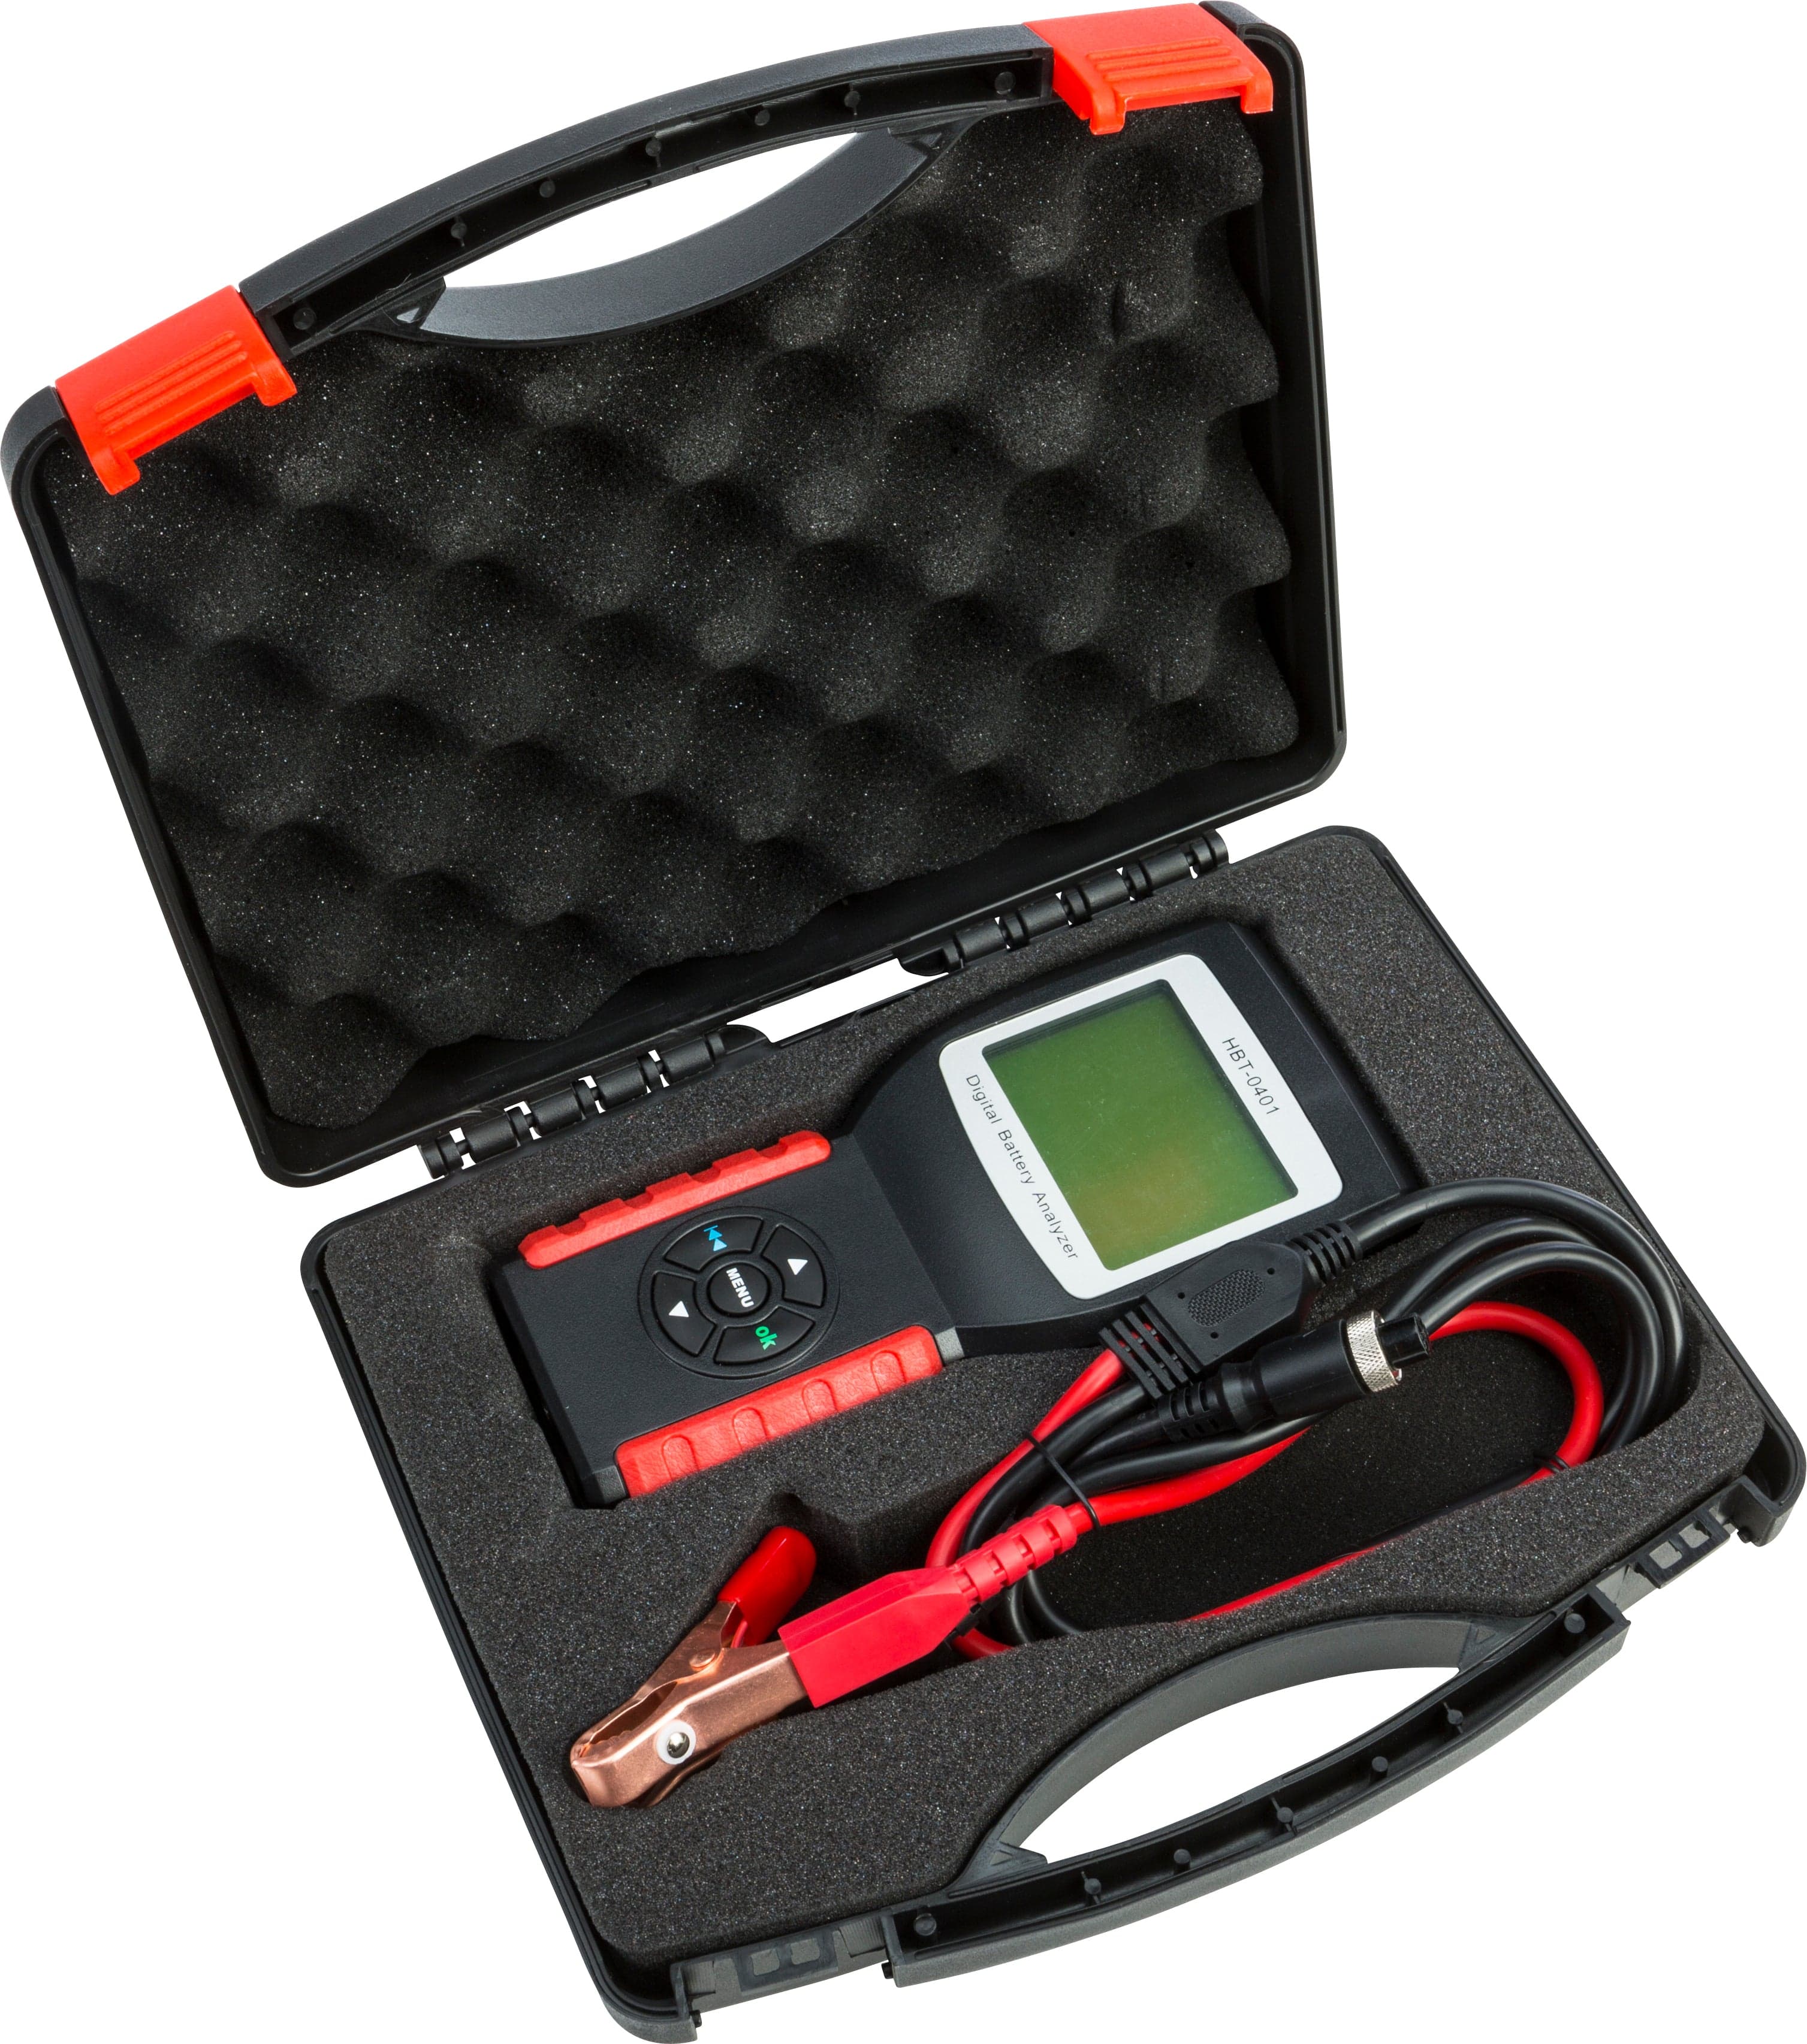 Western Powersports Battery Charger Digital Battery Tester by Fire Power HBT-0401